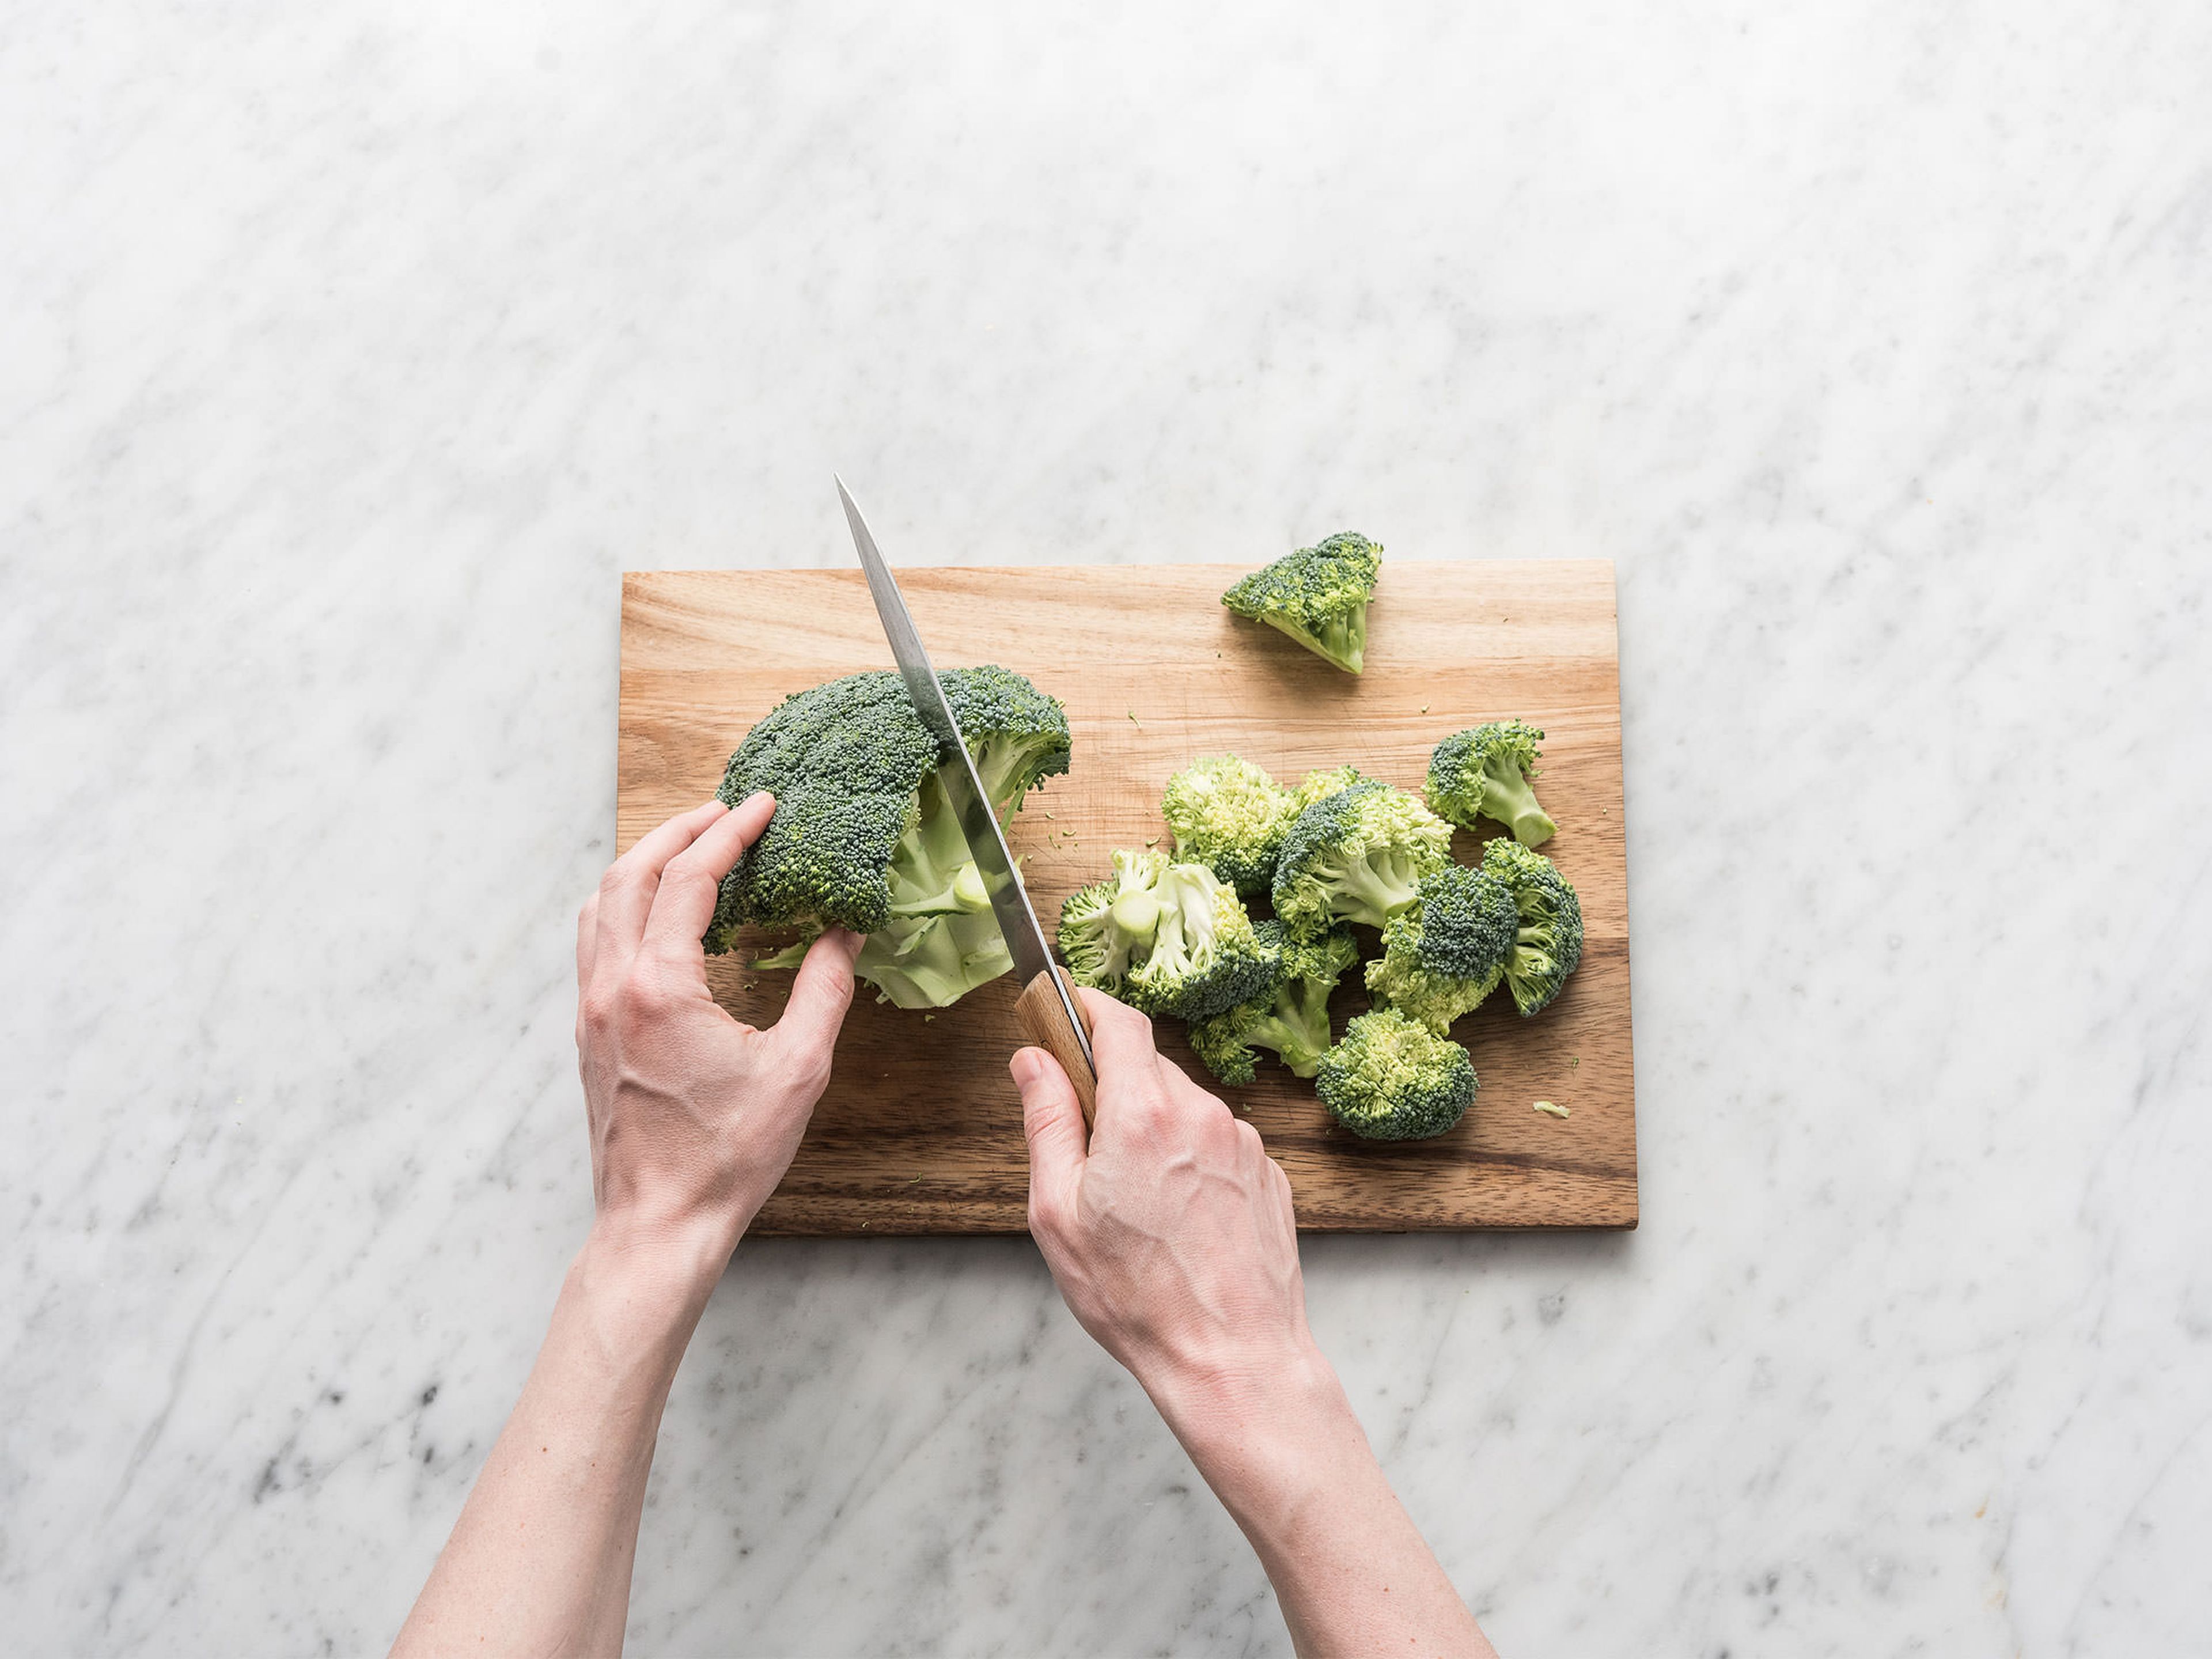 Cut broccoli into bite-sized florets. Then, fill a large saucepan half full with salted water, bring to a boil, and blanch broccoli for approx. 2 – 3 min. Drain and set aside.